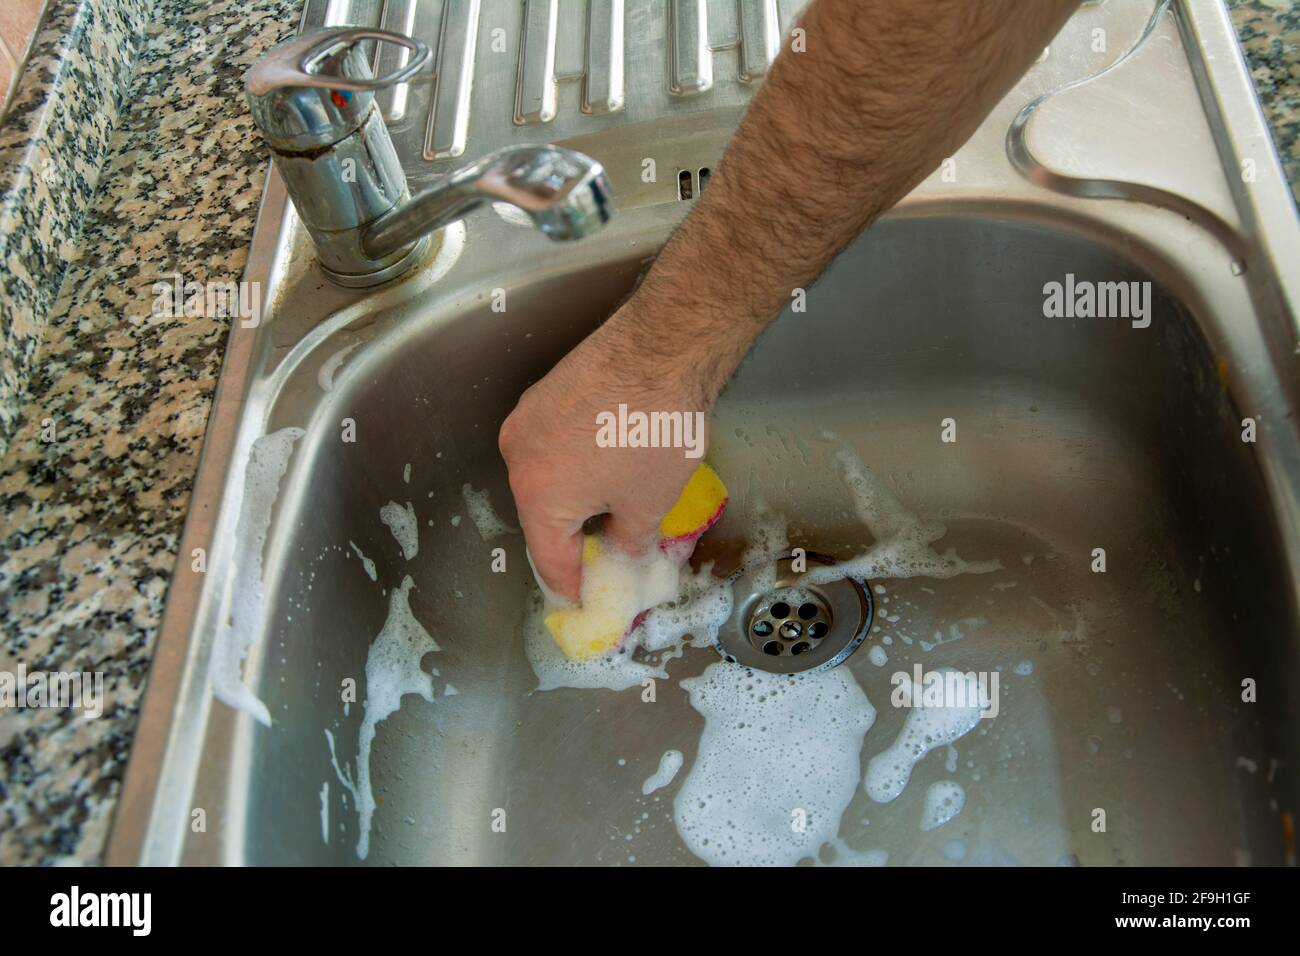 Cleaning the dirty sink with a sponge Stock Photo